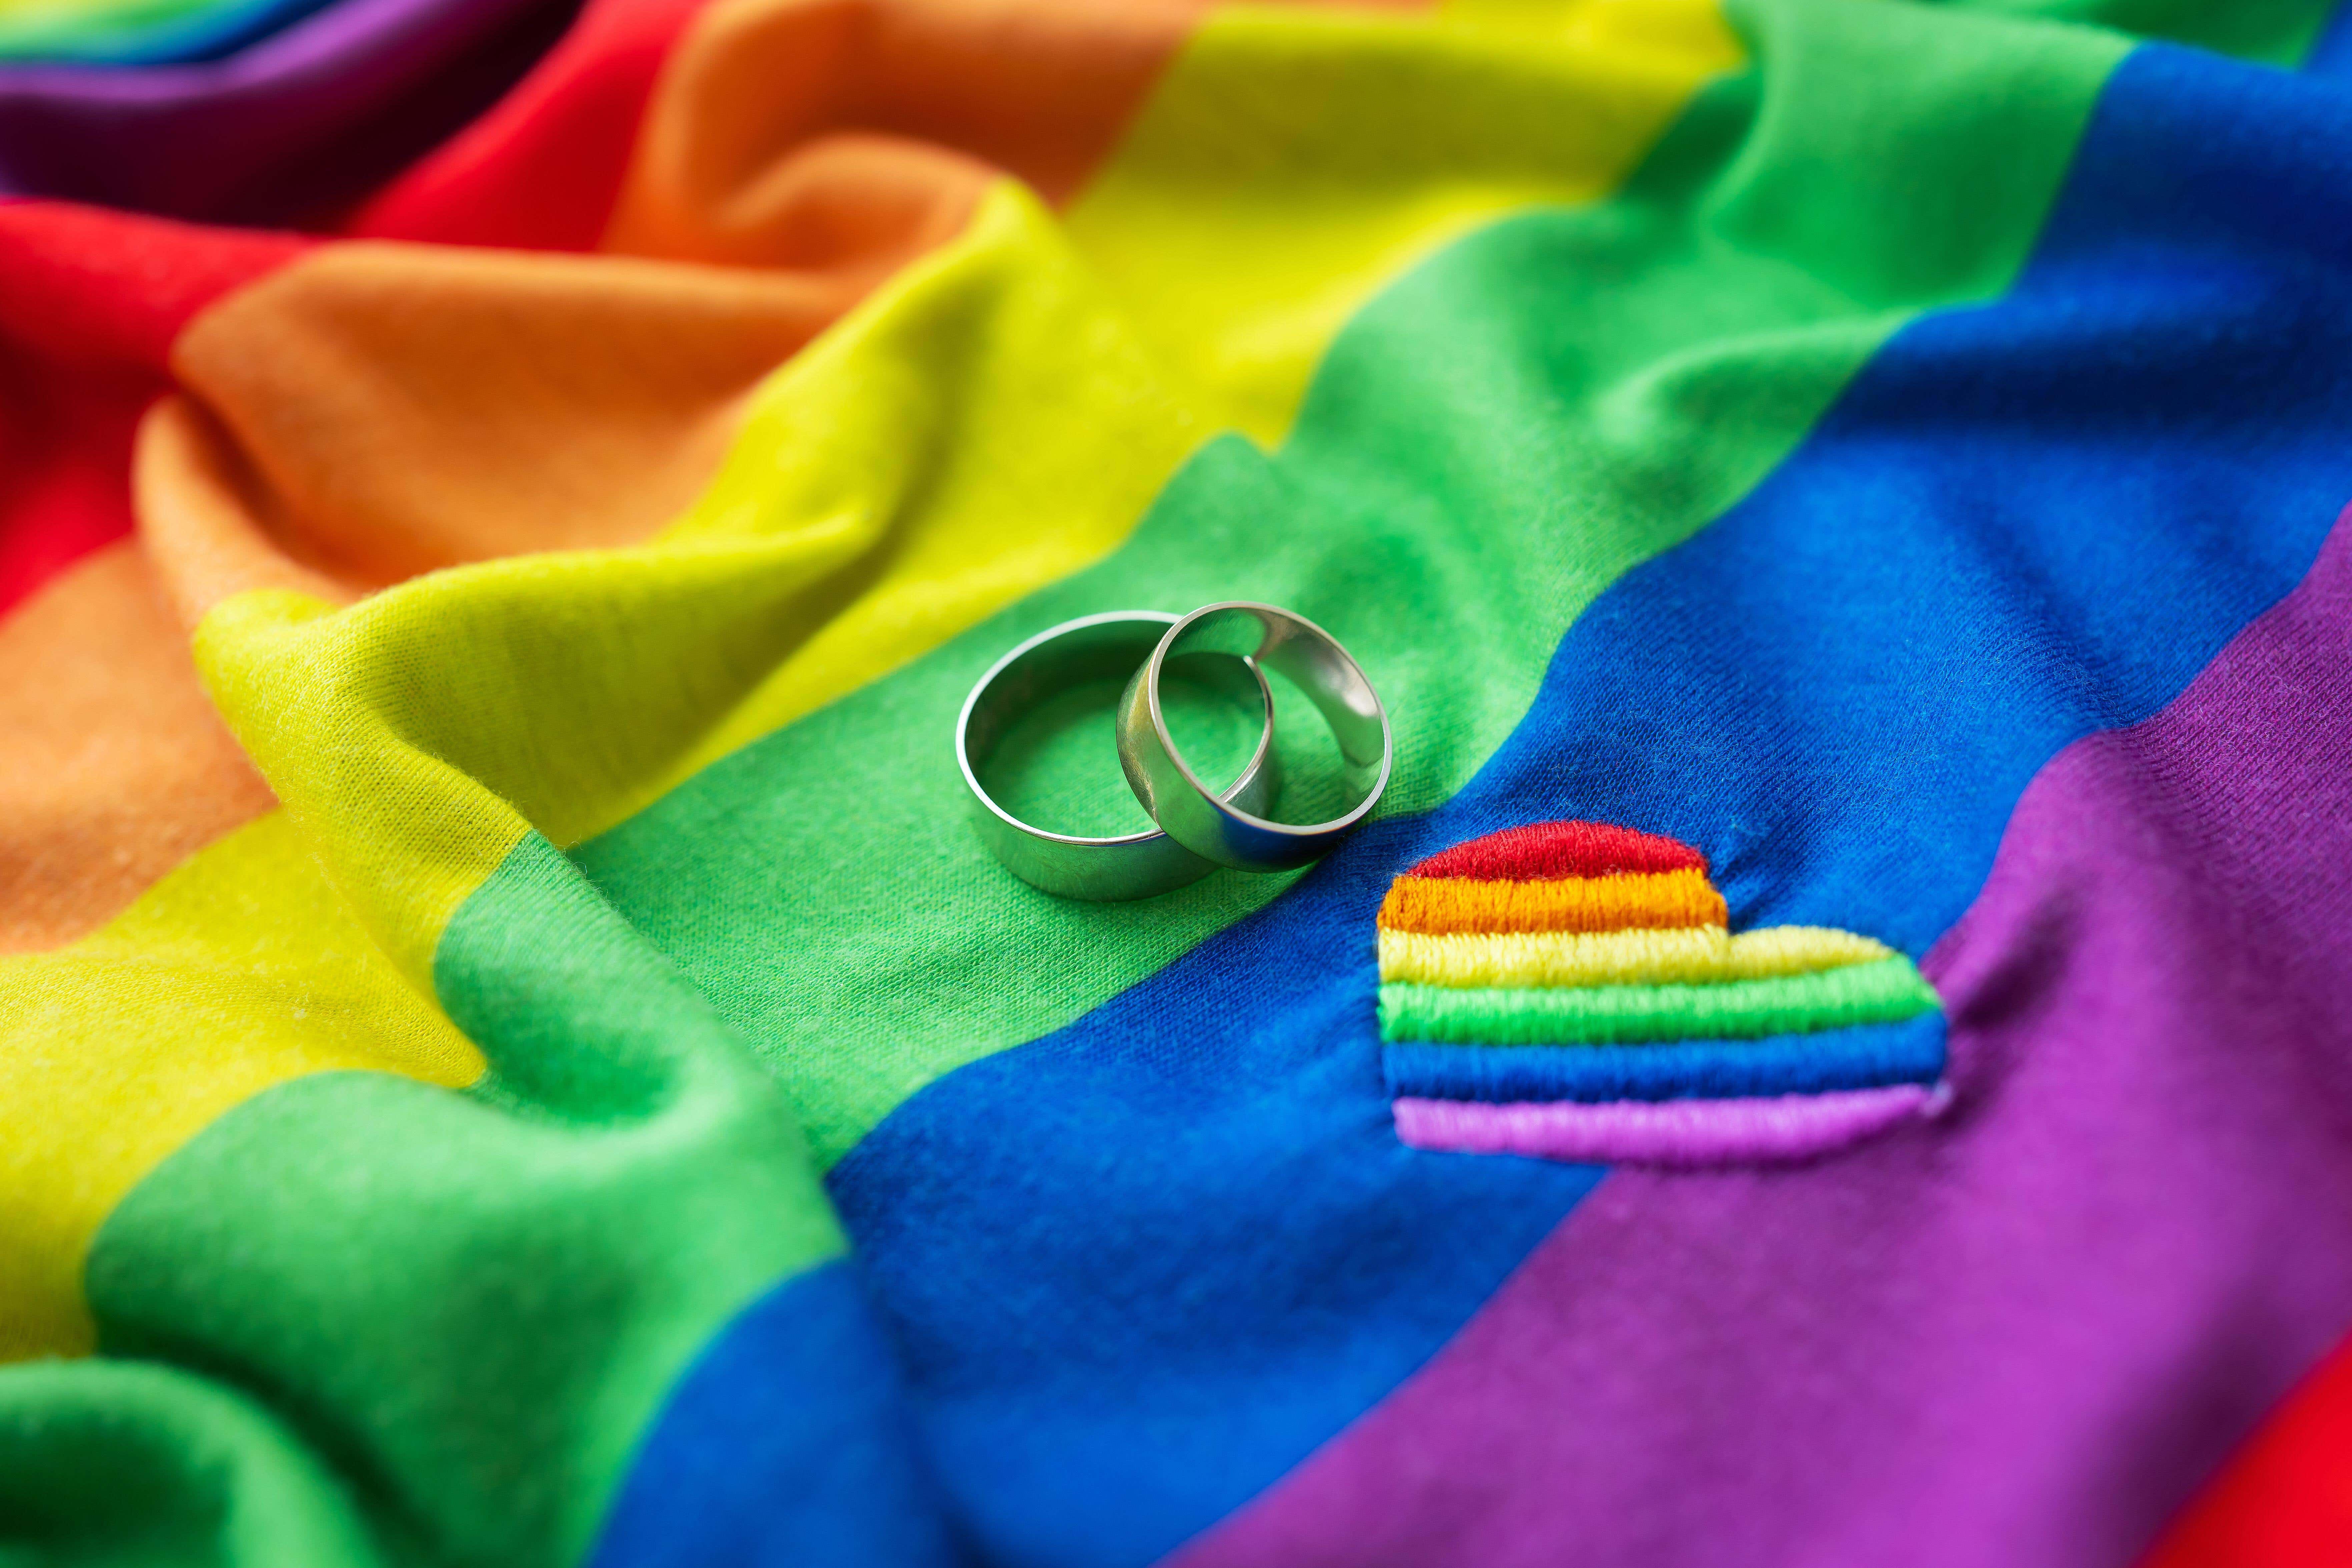 Legislation to allow same-sex marriage in England and Wales was passed by the UK parliament in July 2013